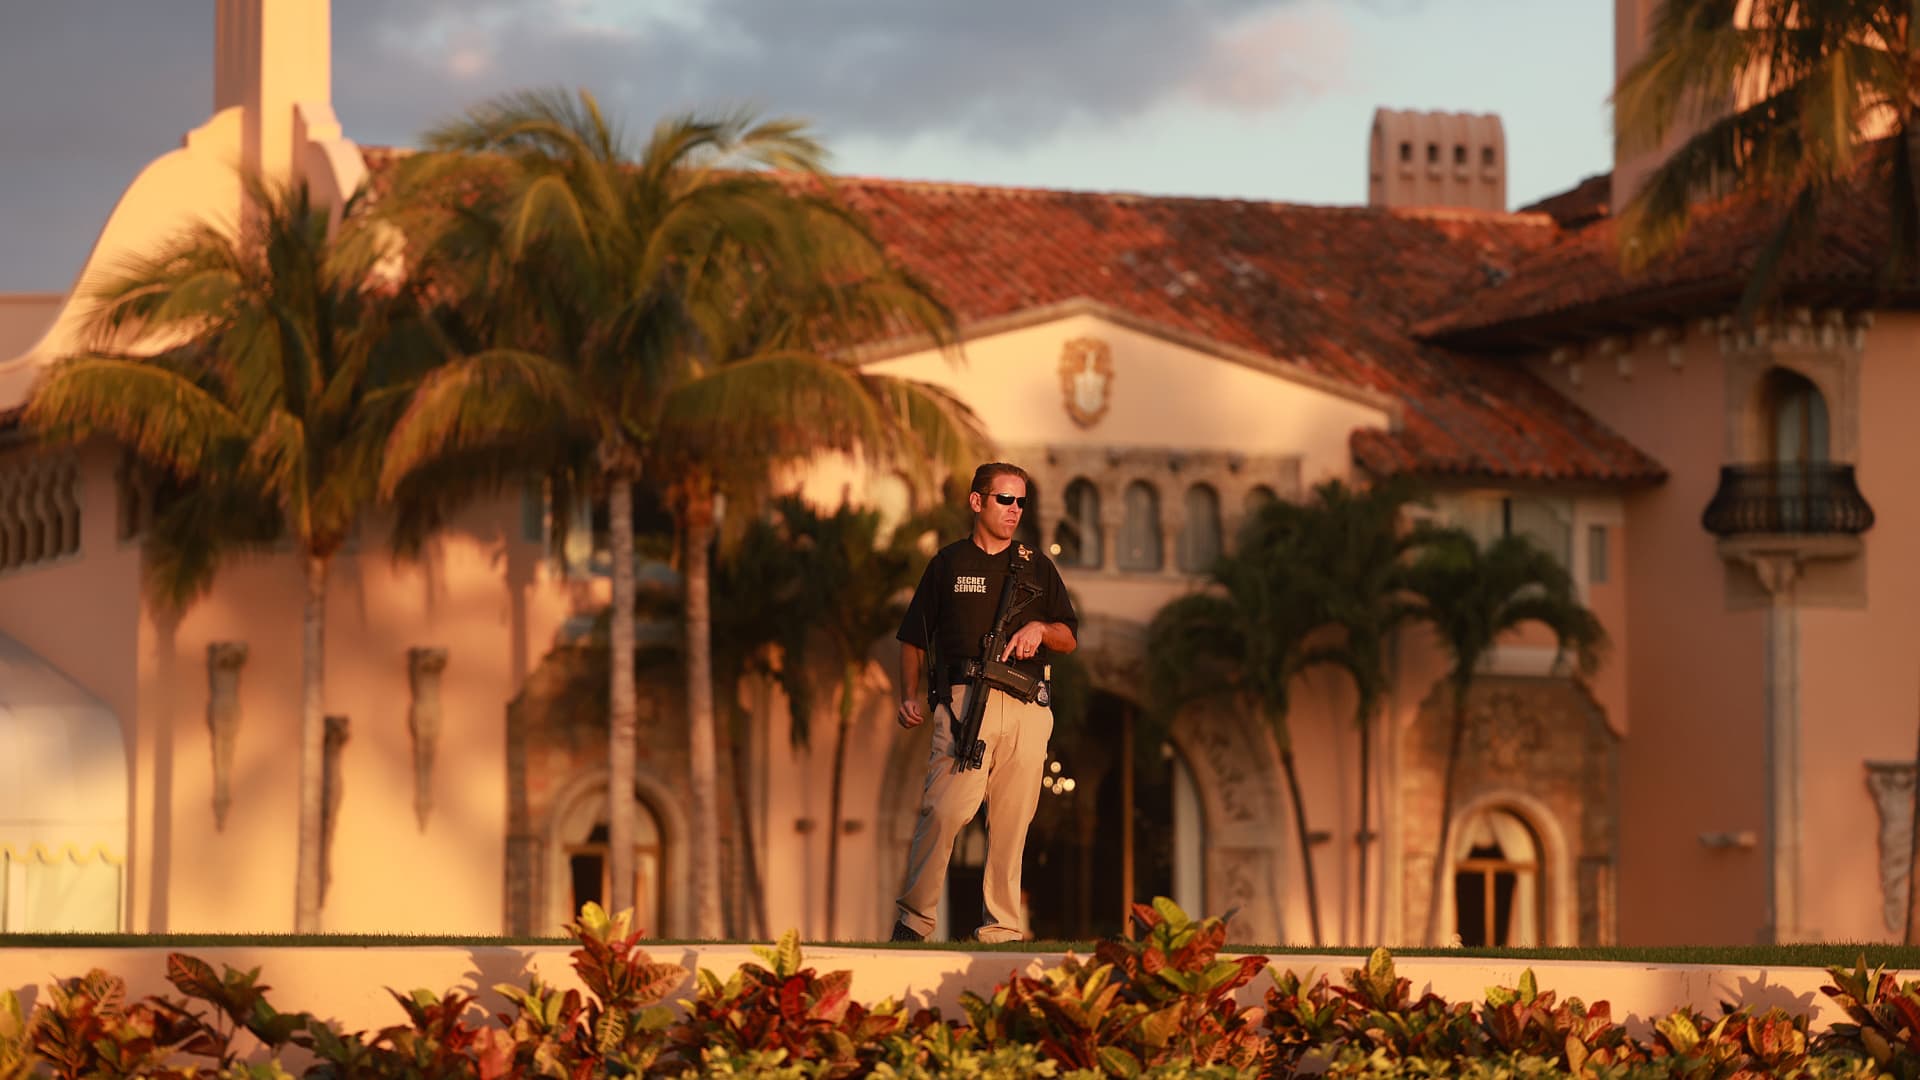 A Secret Service agent guards the Mar-a-Lago home of former President Donald Trump on March 21, 2023 in Palm Beach, Florida.